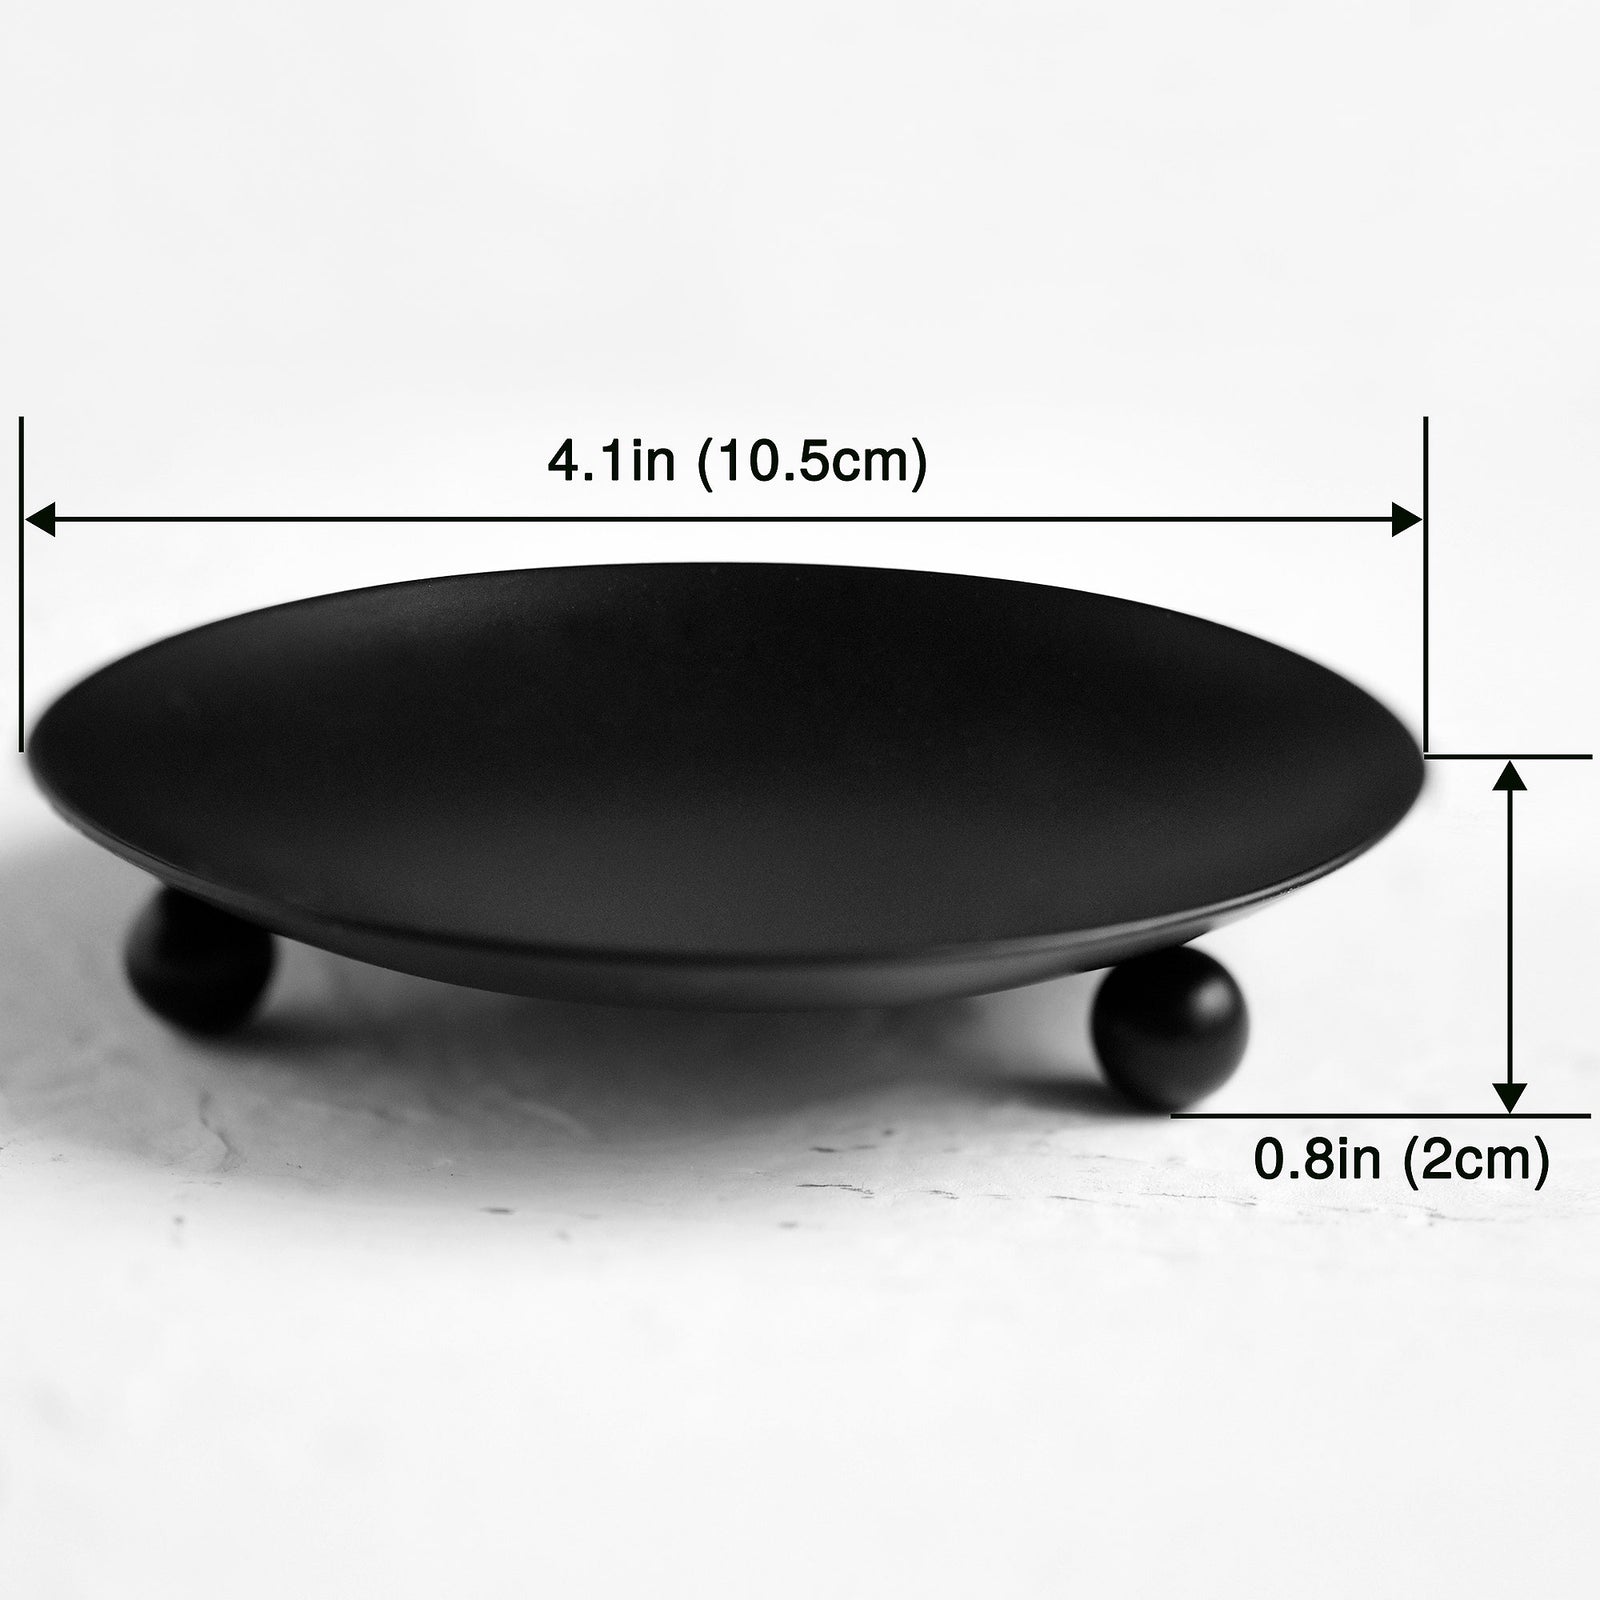 2 Black Plated Round Iron Candle Holders for Pillar Votive Wax Candles